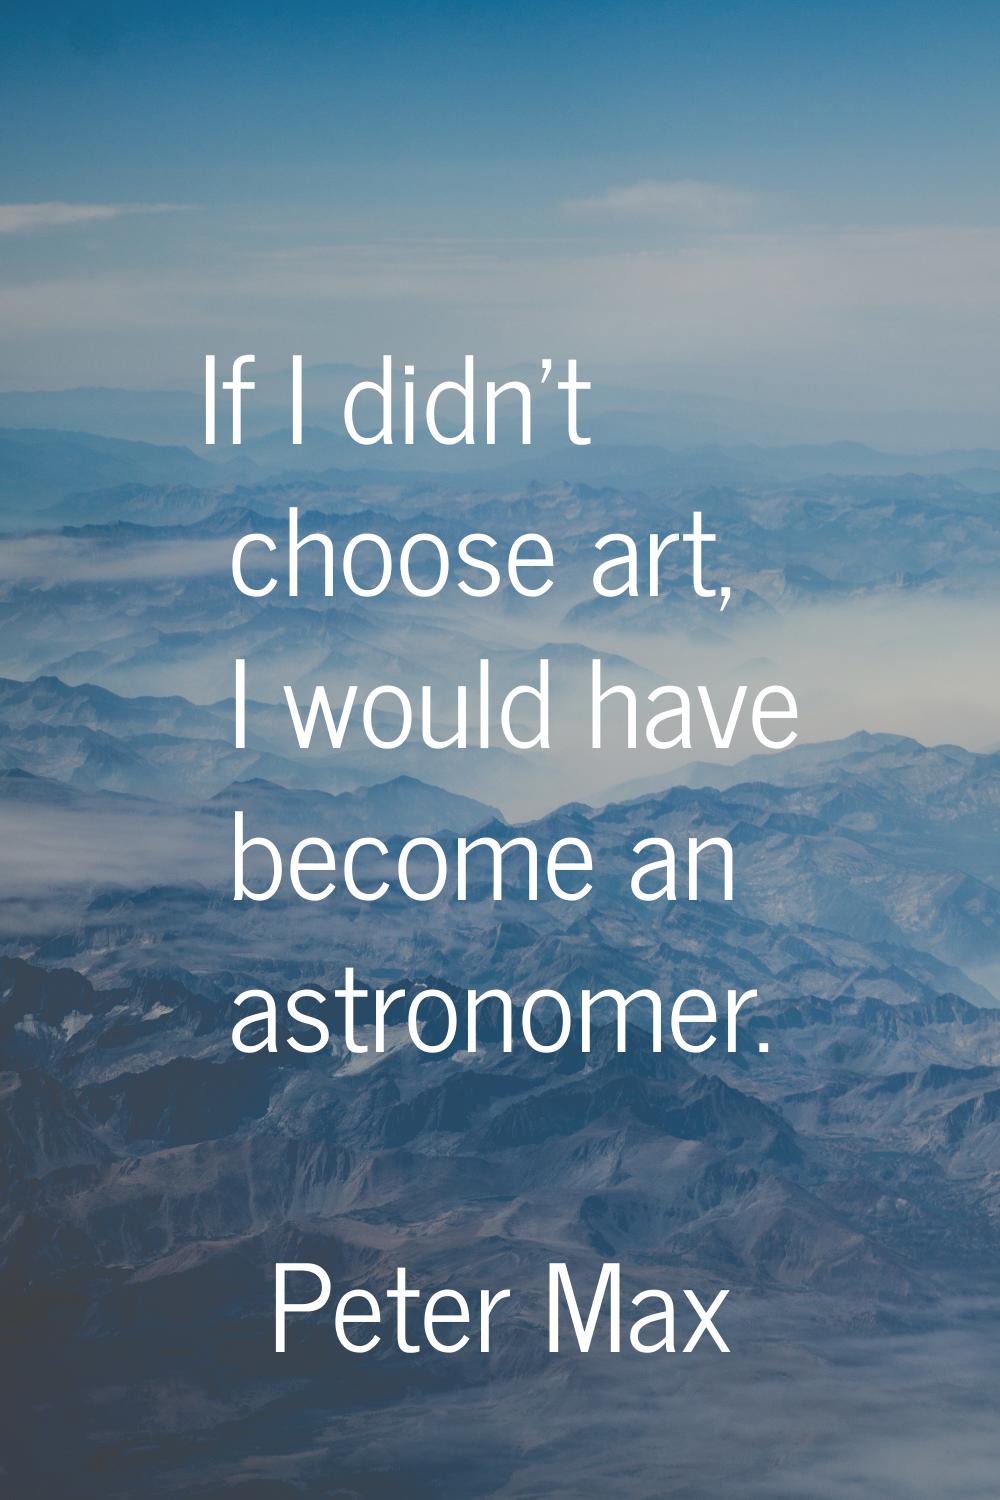 If I didn't choose art, I would have become an astronomer.